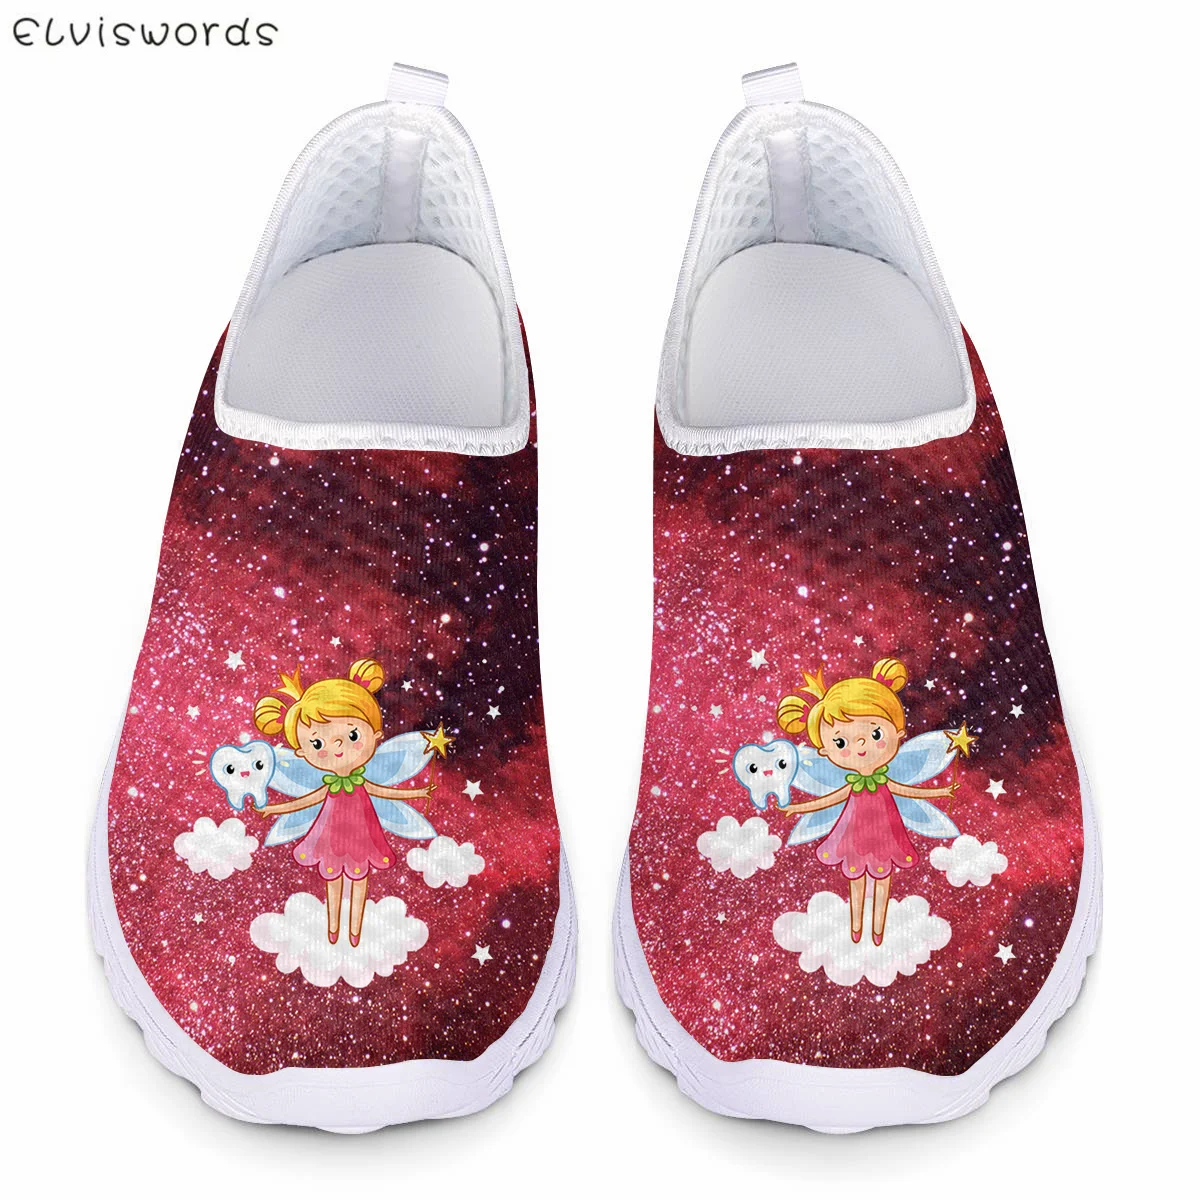 

ELVISWORDS Pretty Galaxy With Angle Girls Pattern Flats Shoes for Women Summer Breathable Mesh Sneaekr Slip-on Loafers Light New